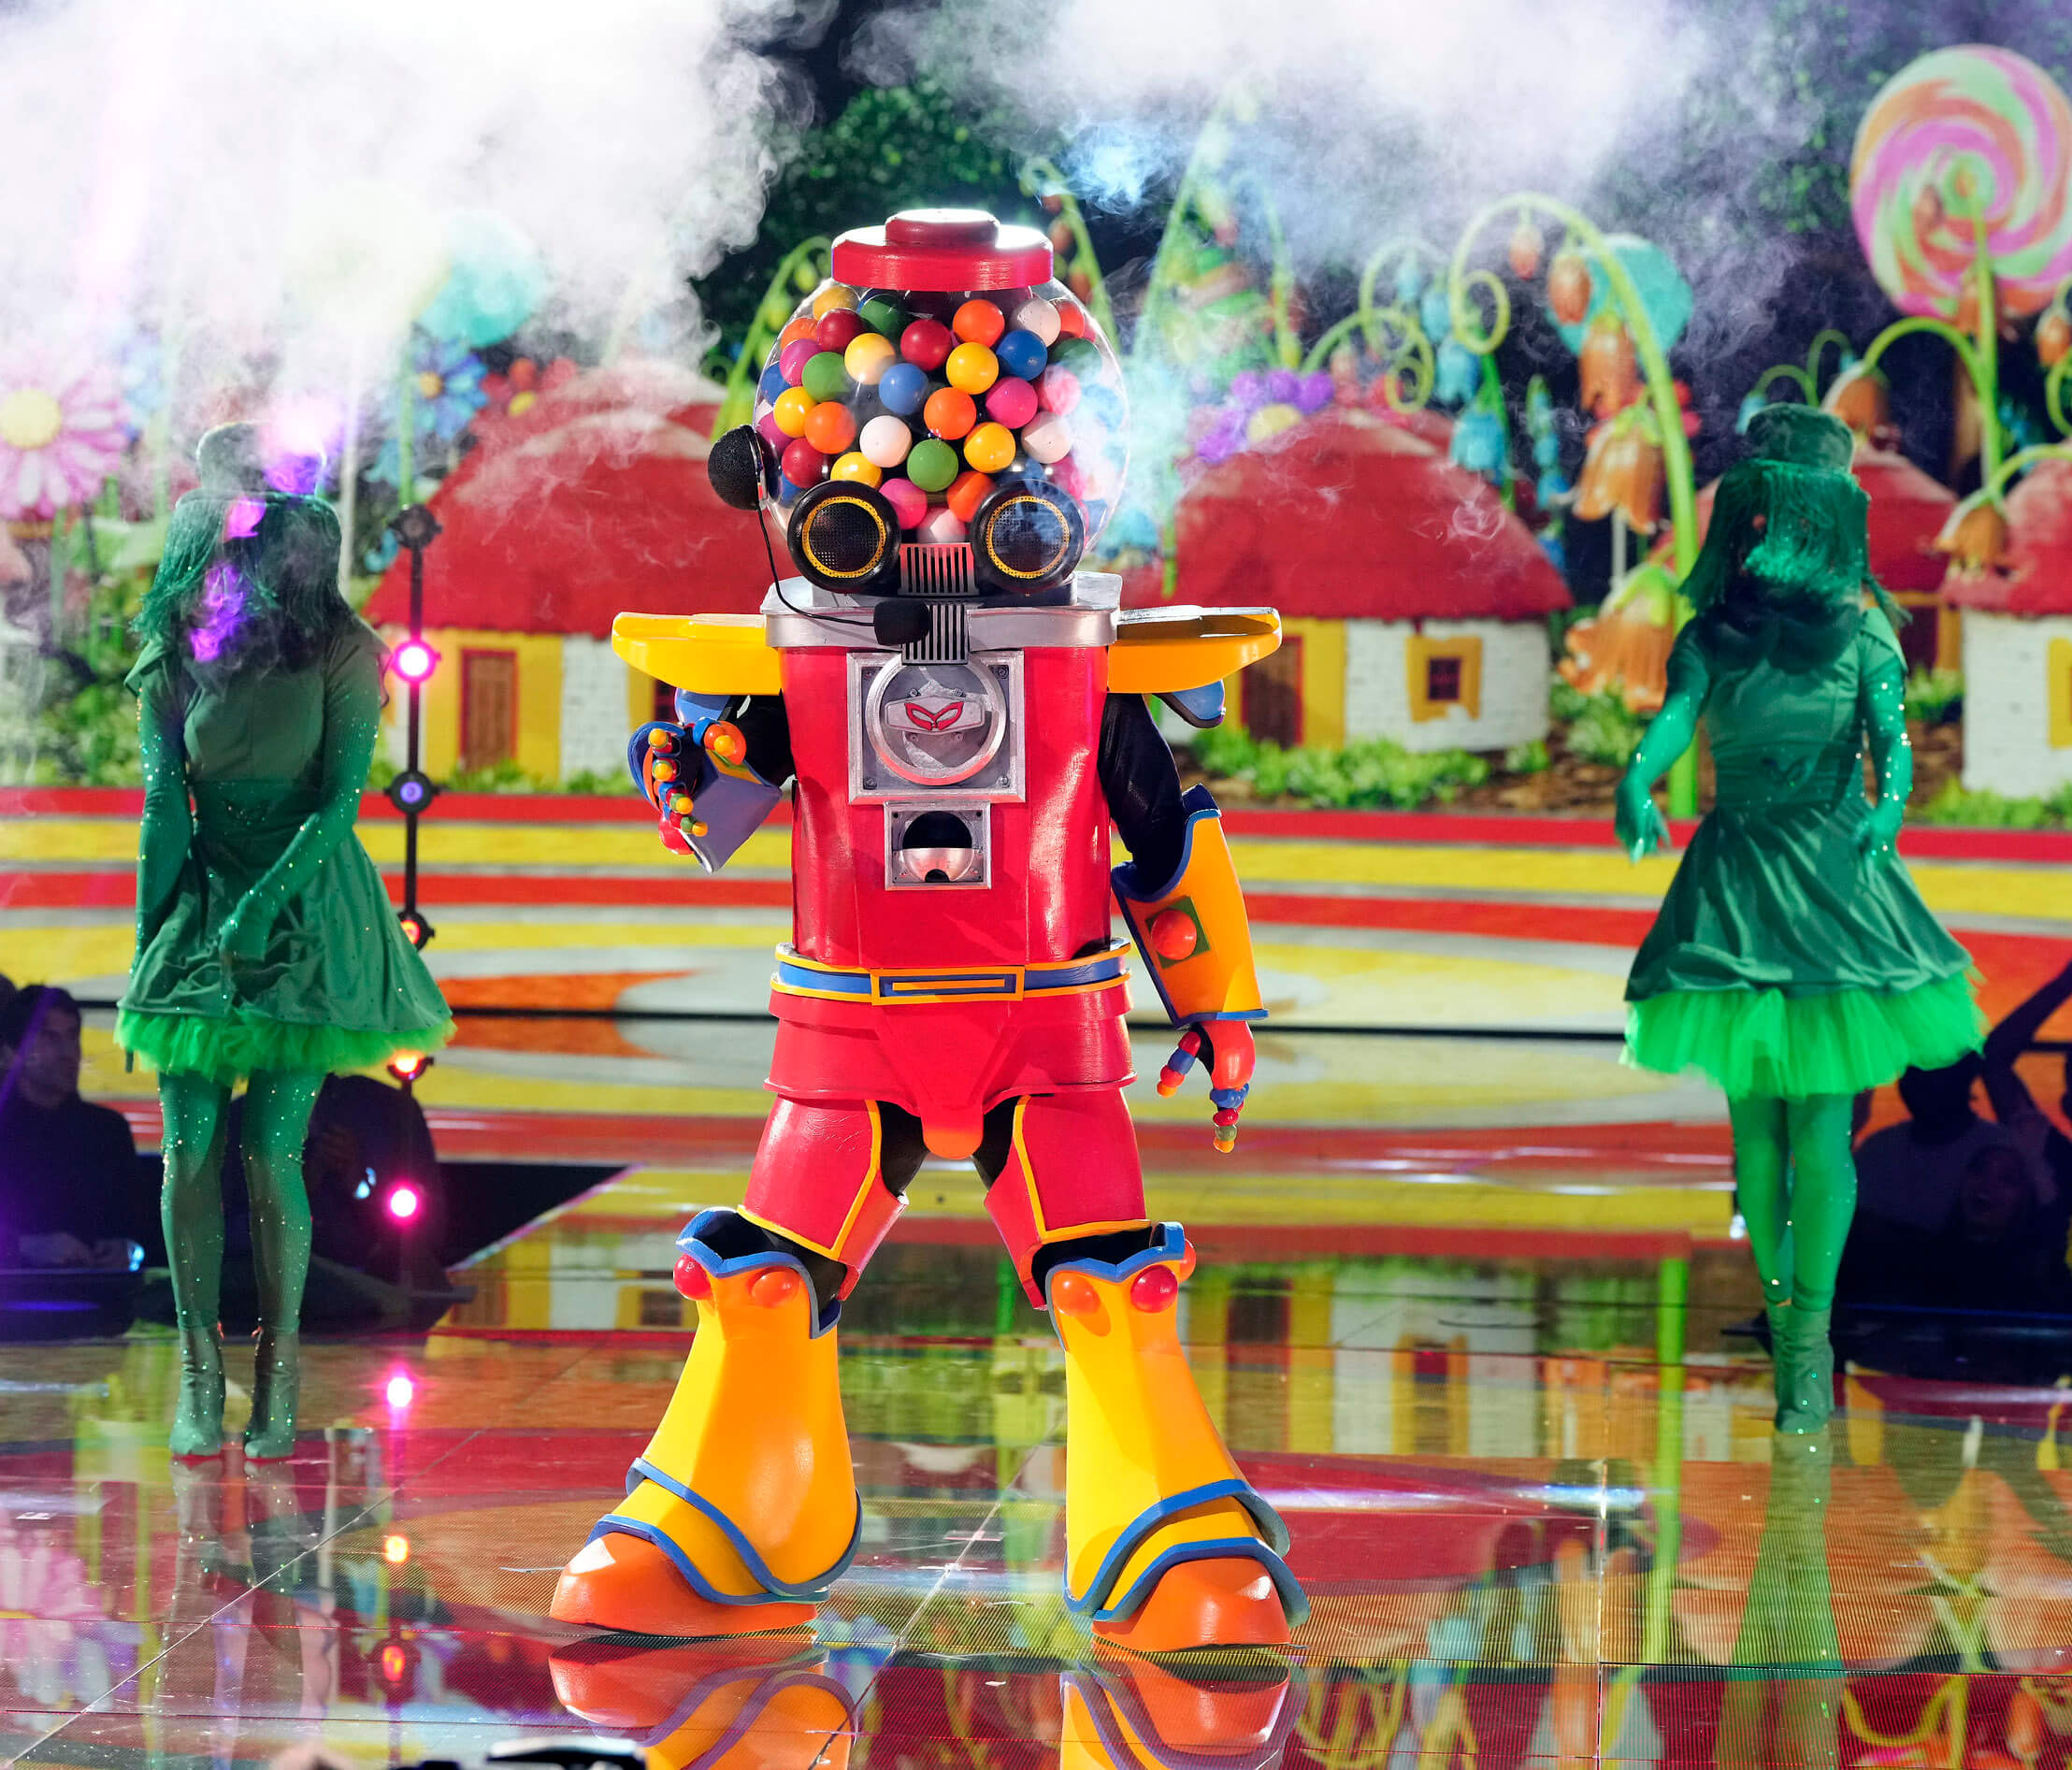 'The Masked Singer' Season 11 singer Gumball on stage with 2 green backup dancers